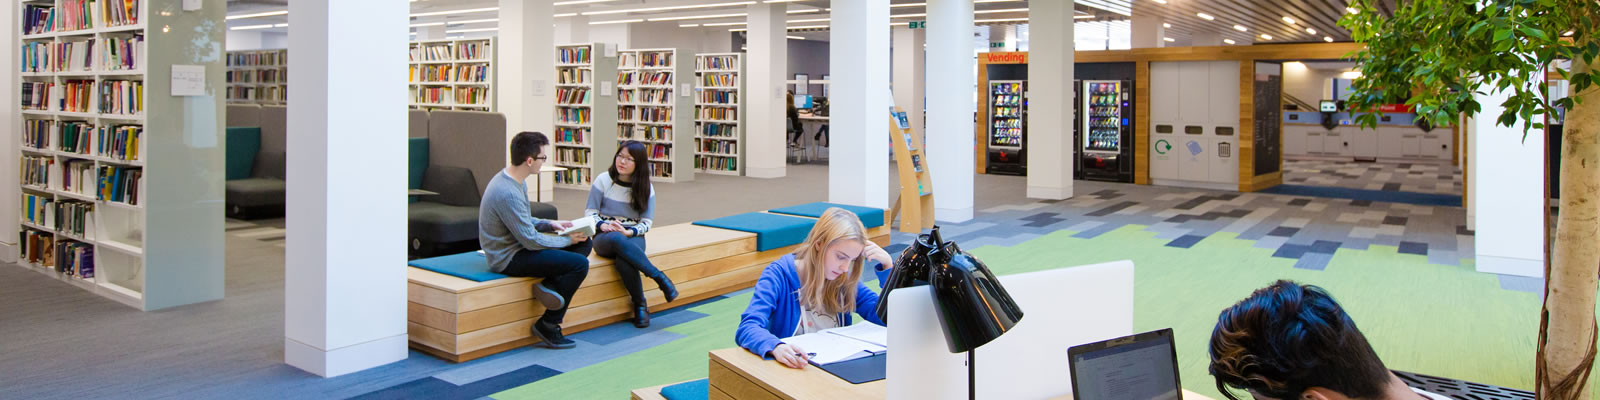 Student in the Lancaster university library